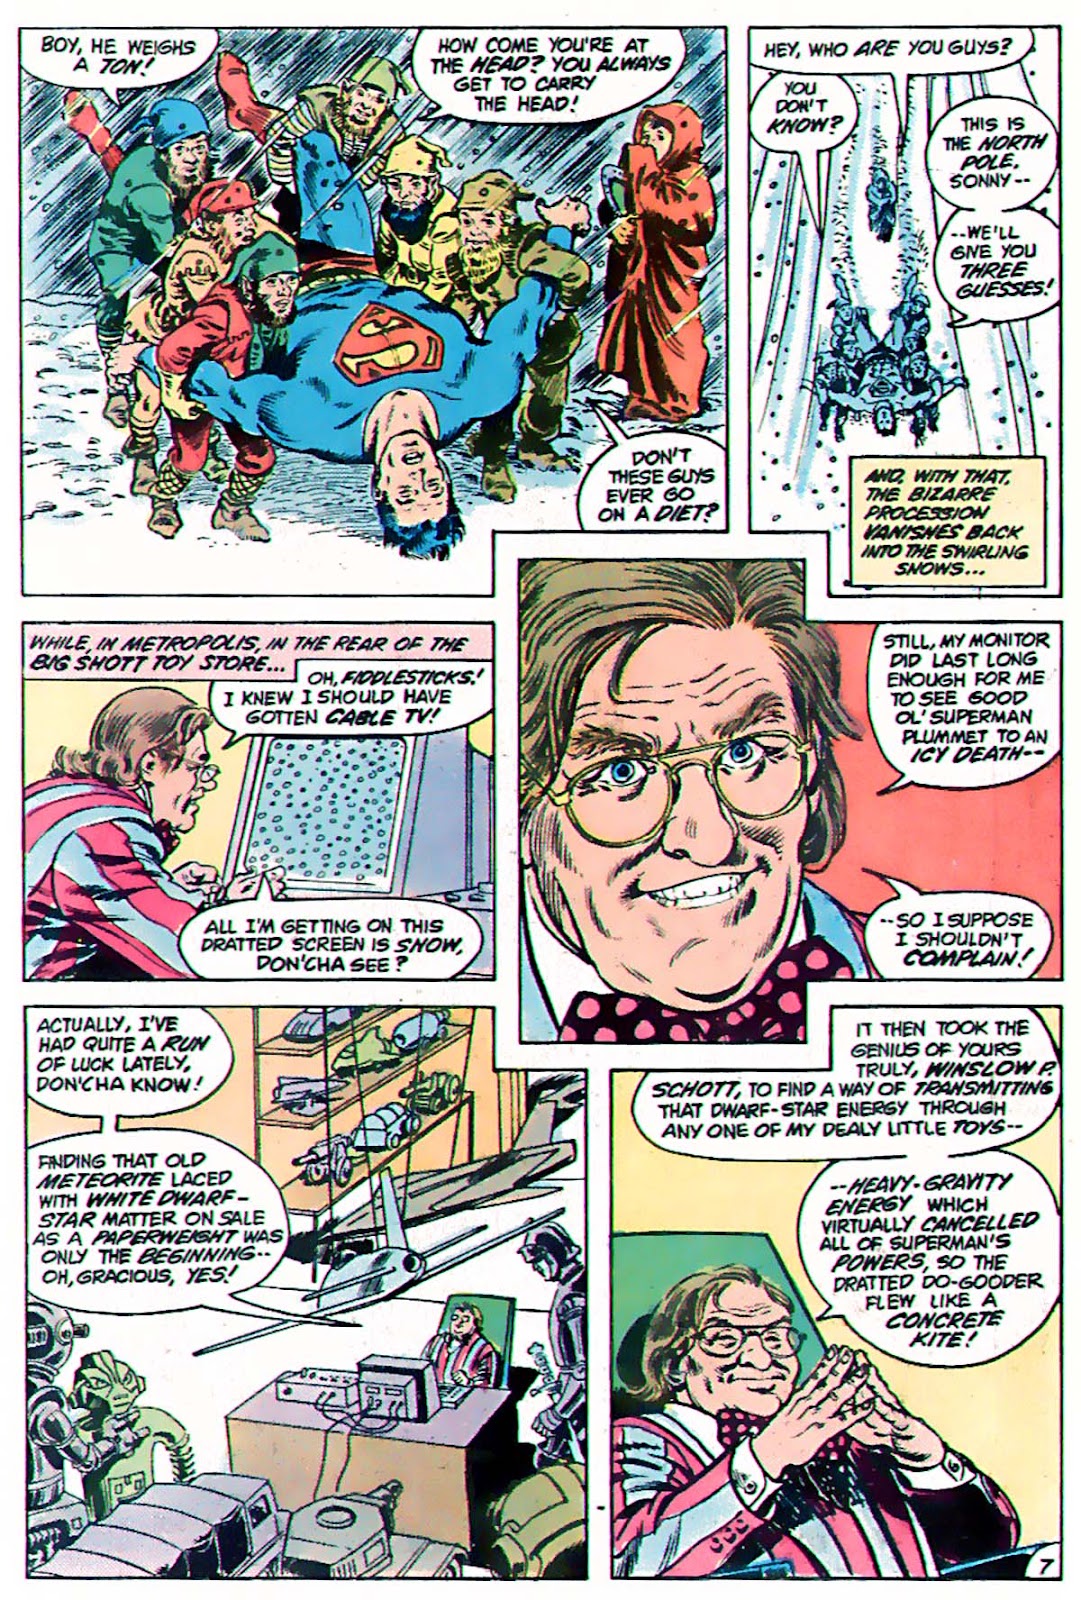 DC Comics Presents (1978) issue 67 - Page 8